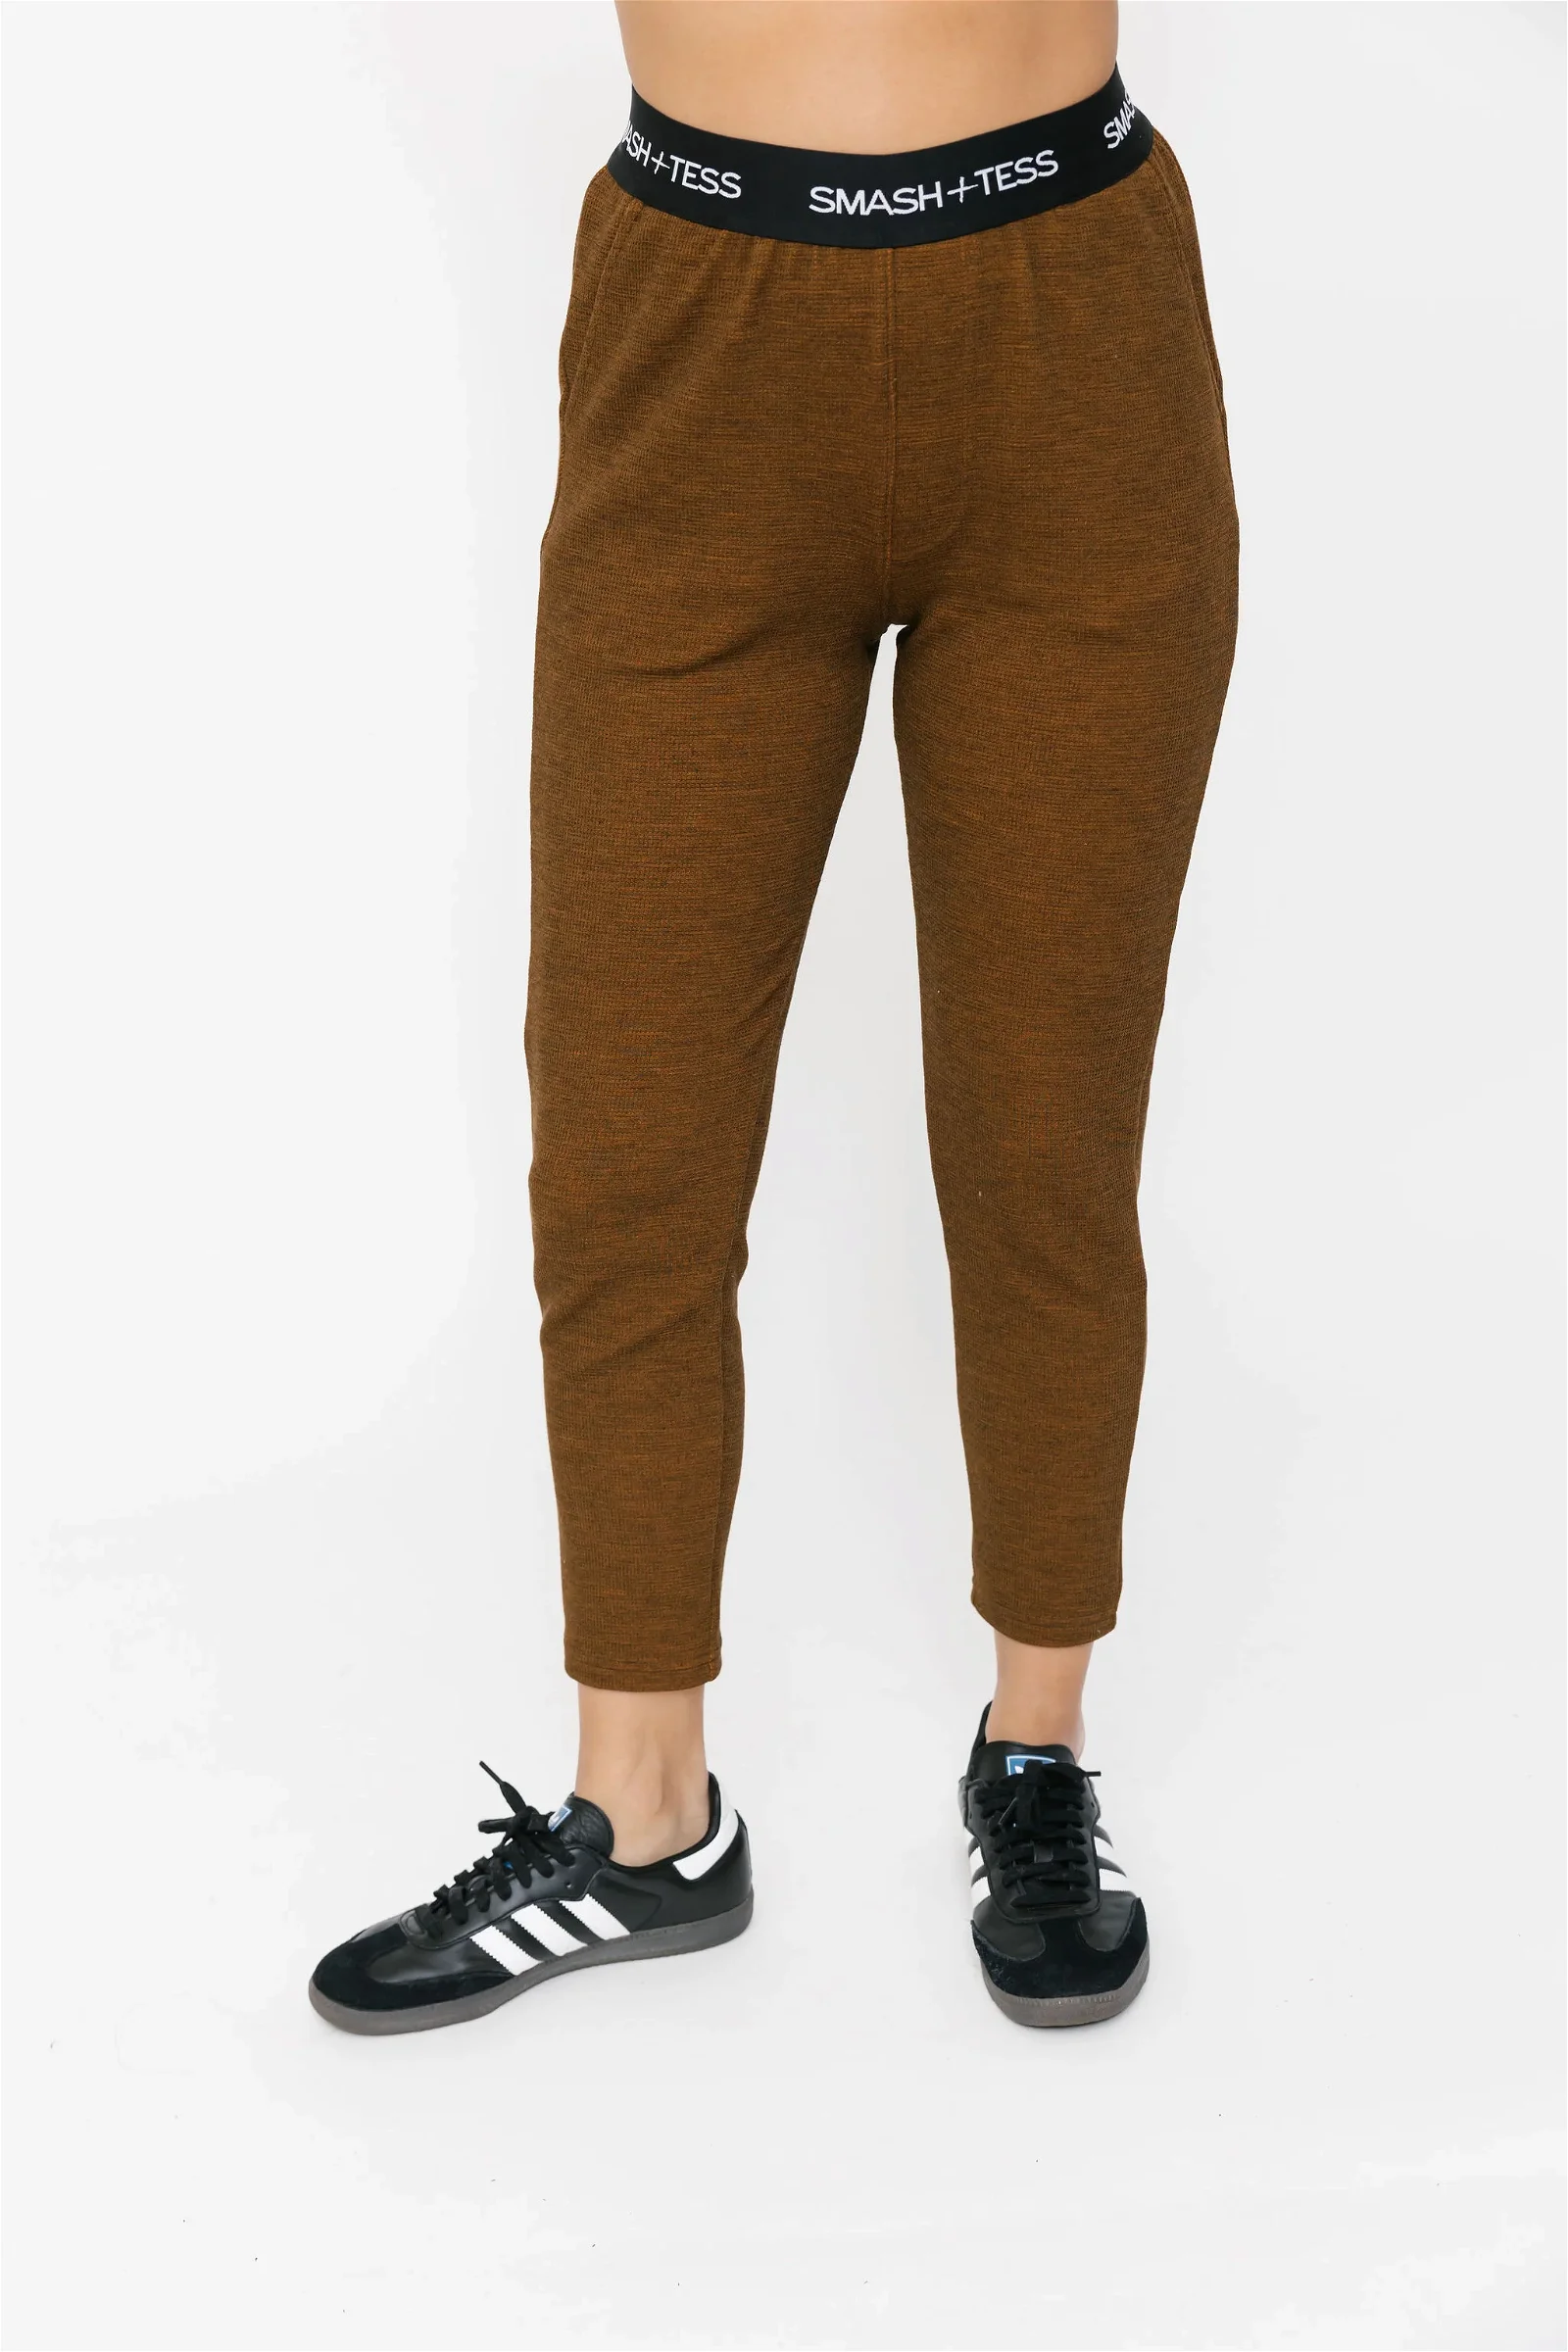 Image of Cuddle Up Waffle Jogger in Dark Caramel Brown